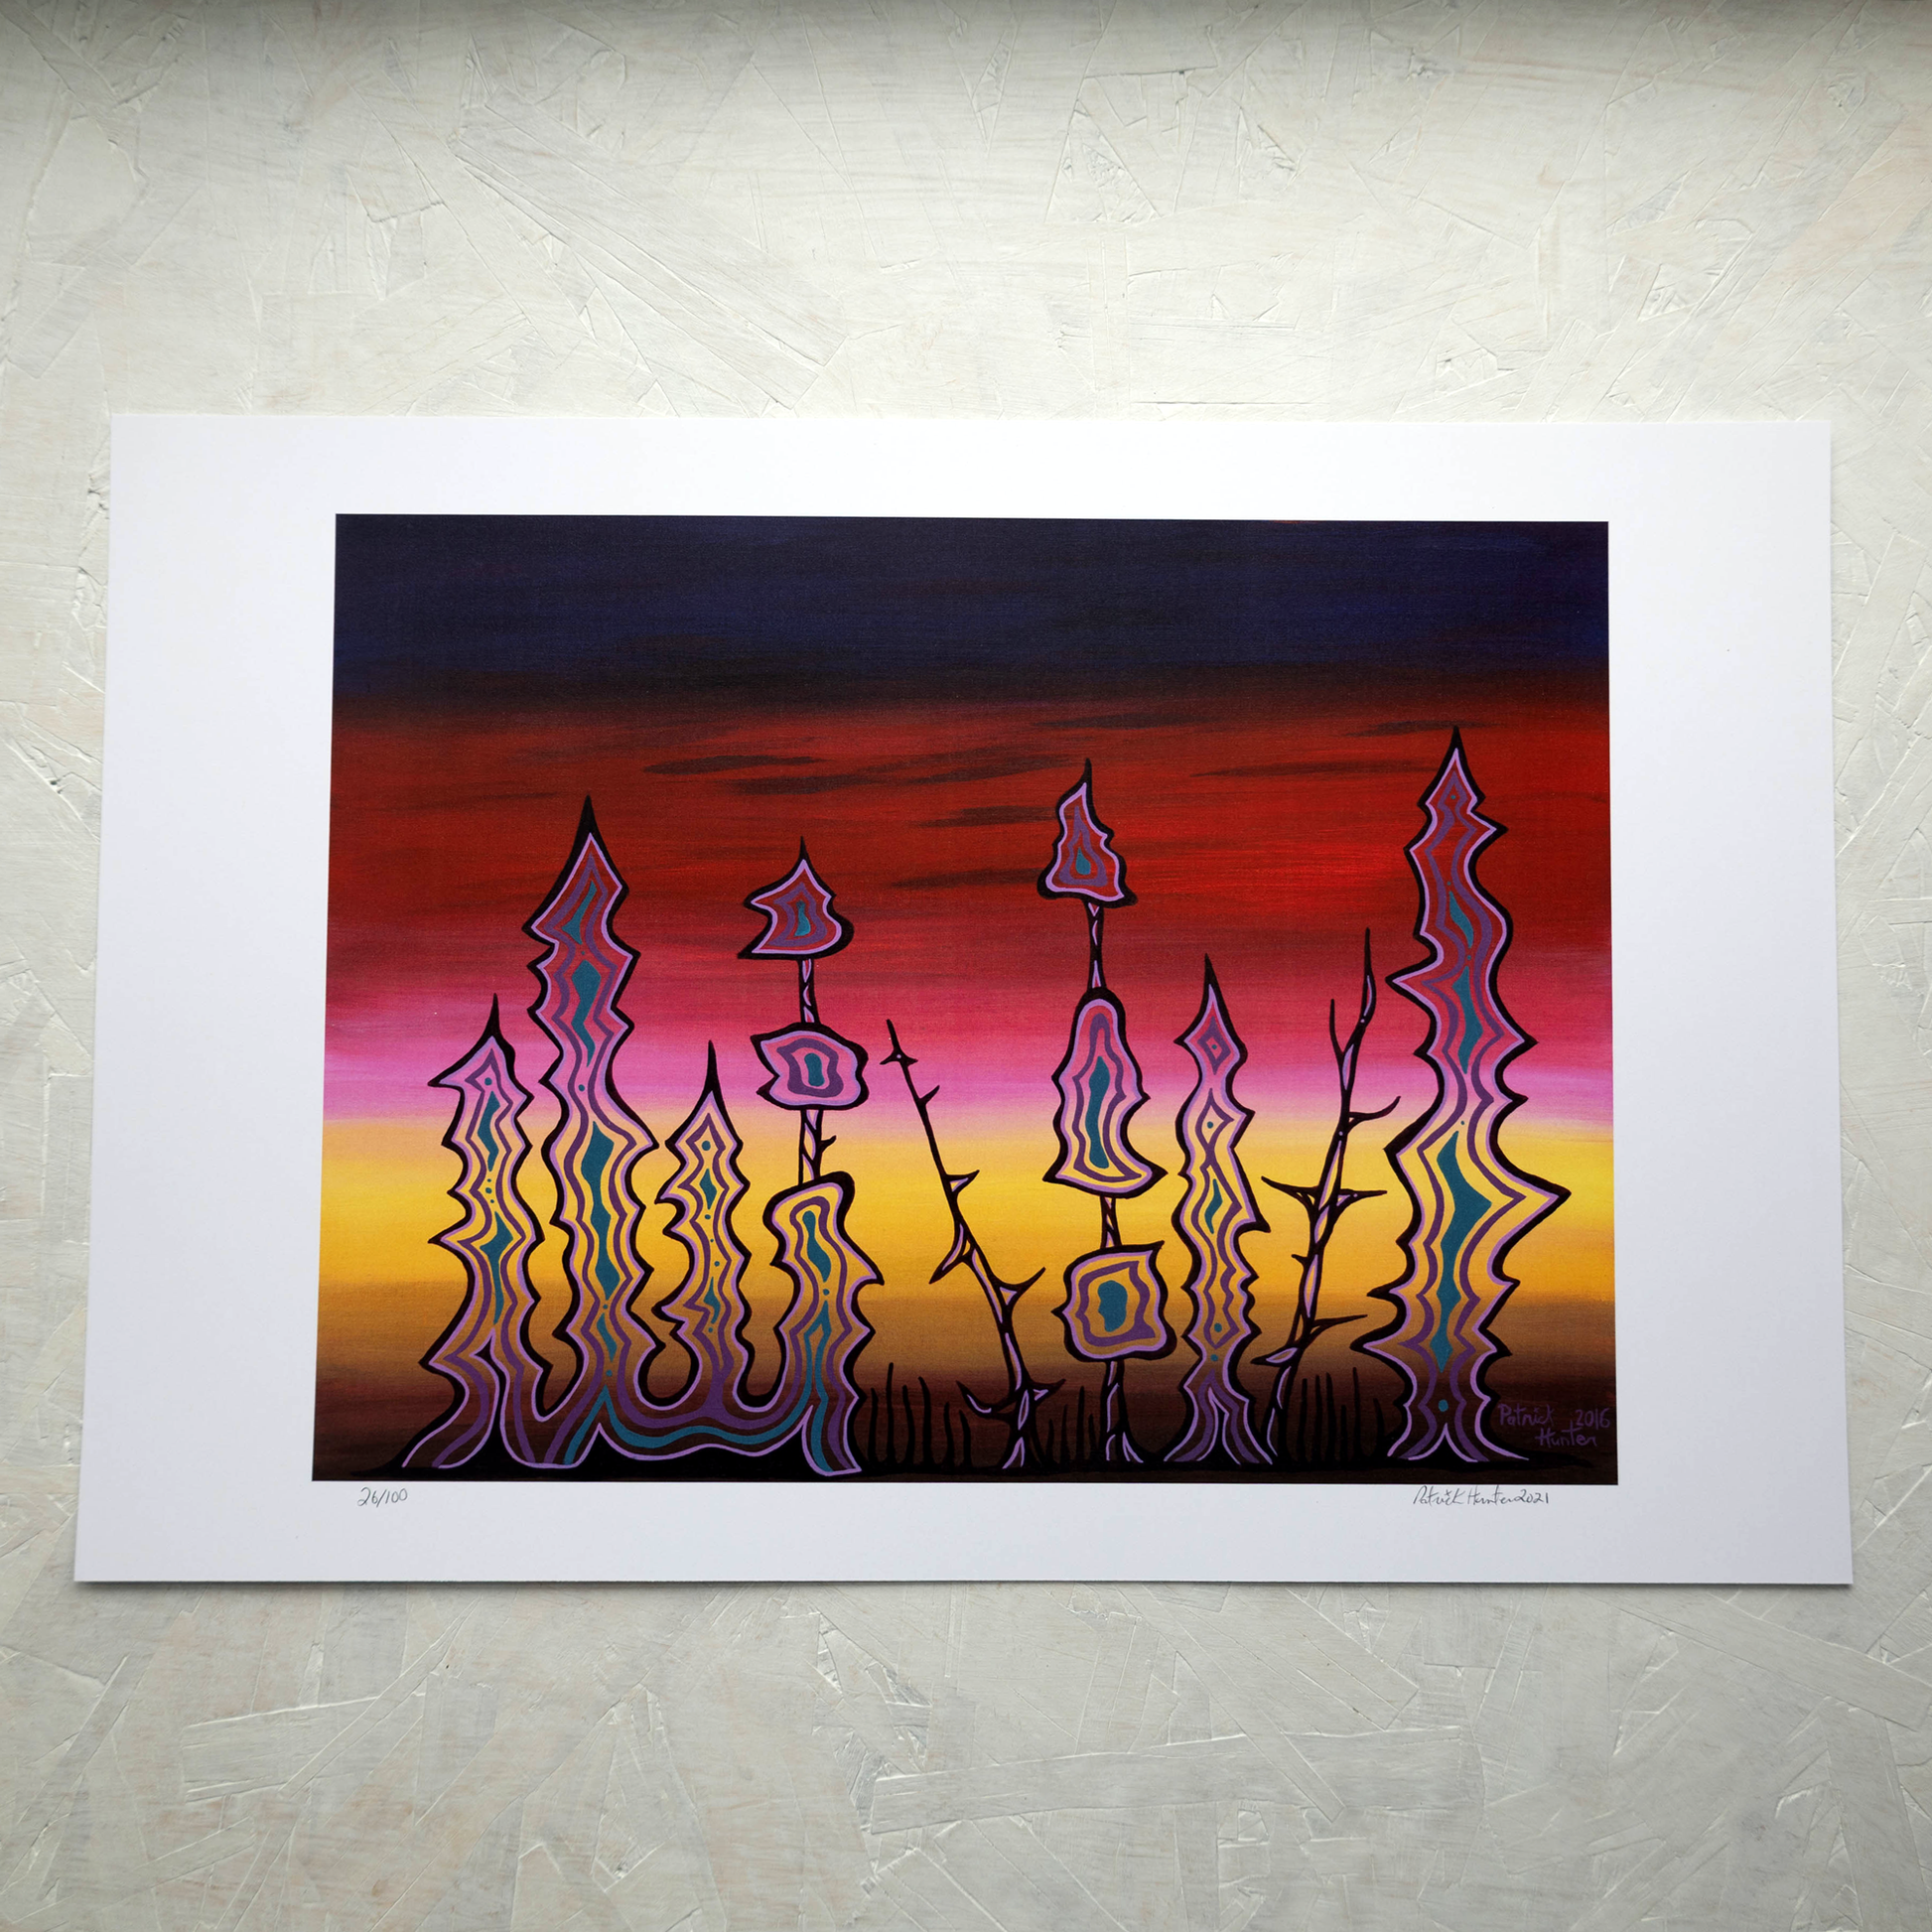 Print of Patrick Hunter's painting of forest spirits against an early morning sky, woodland art style.